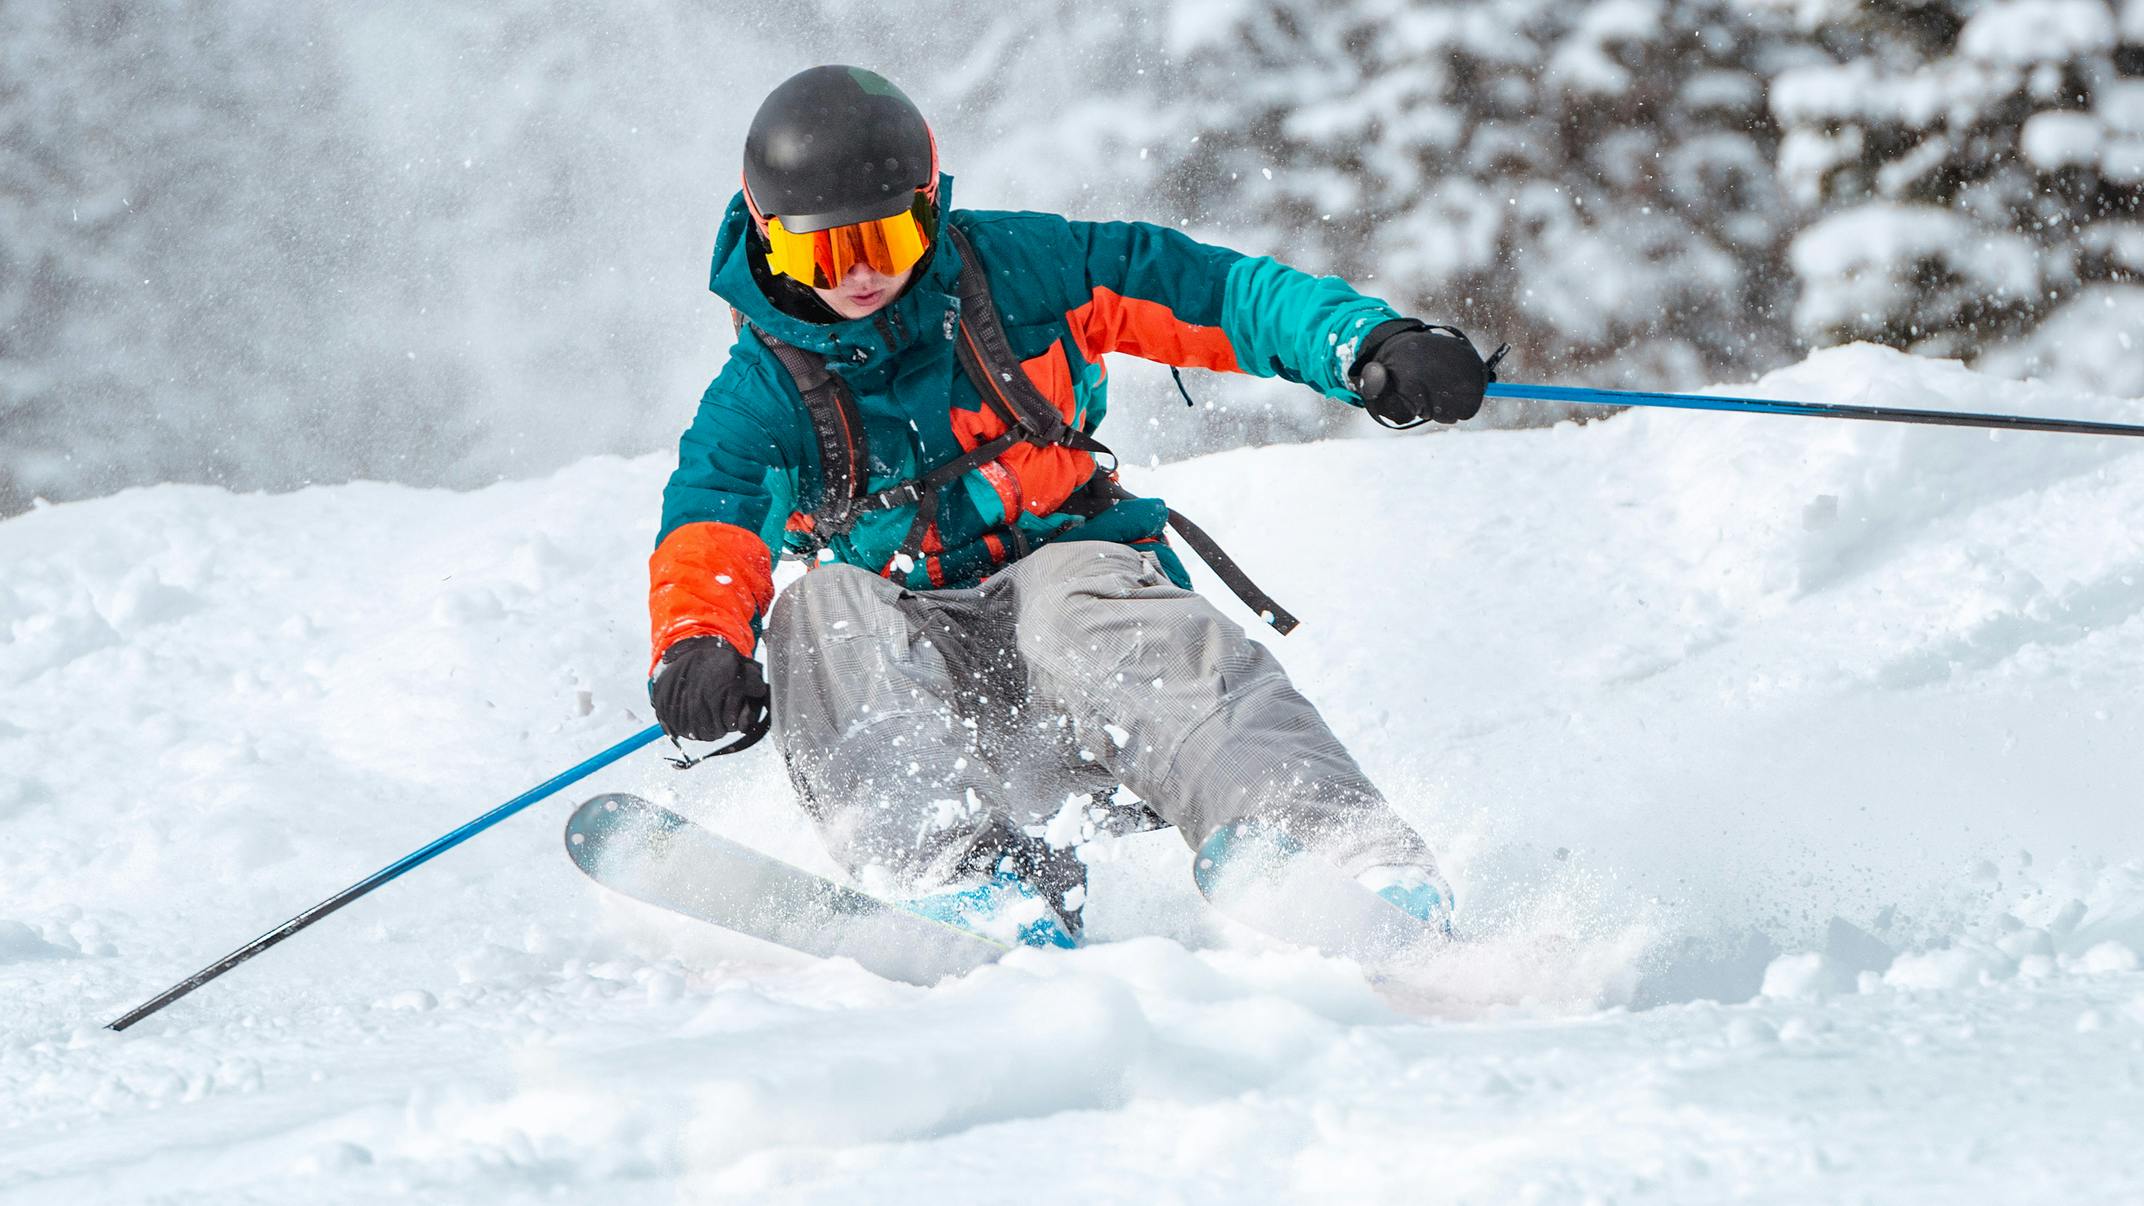 A skier in grey pants and a turquoise jacket races through the snow